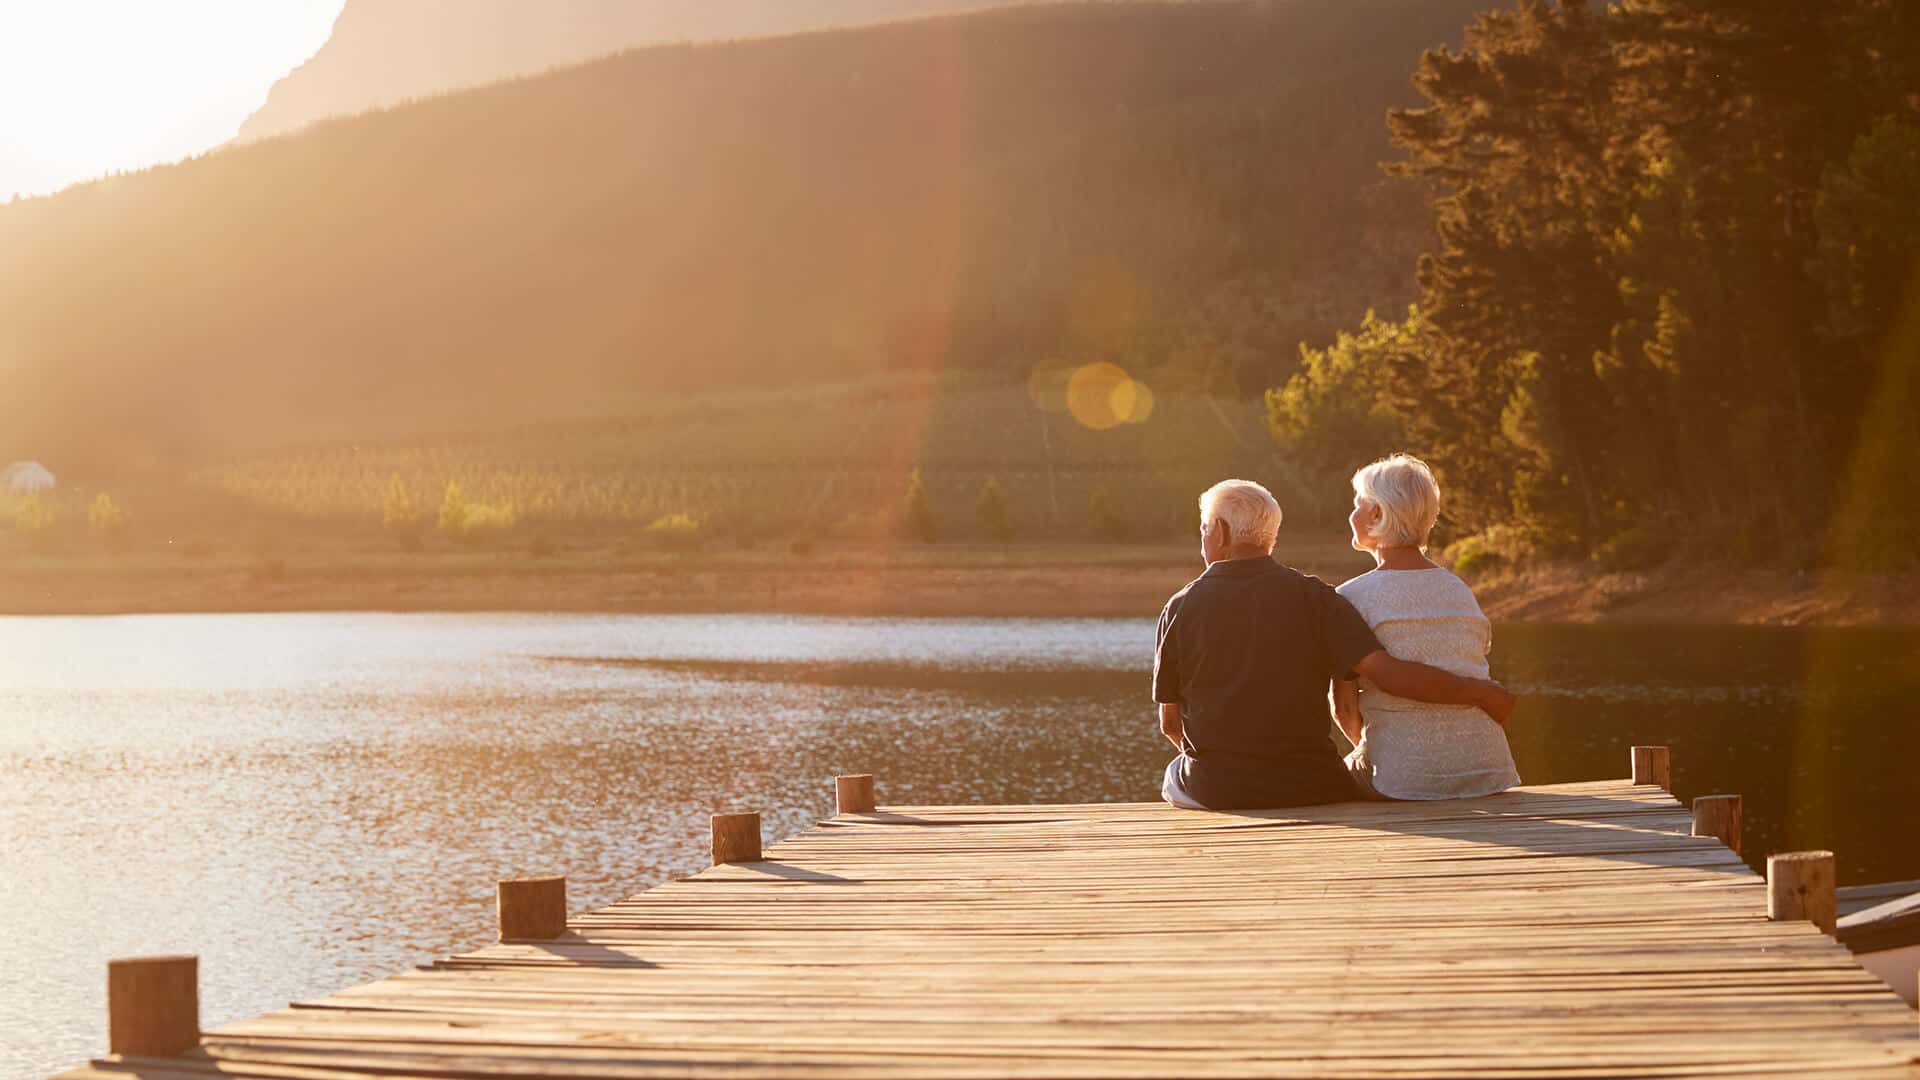 Widowed dating symbolized by a man and woman sitting next to each other on a dock end enjoy the sundowner